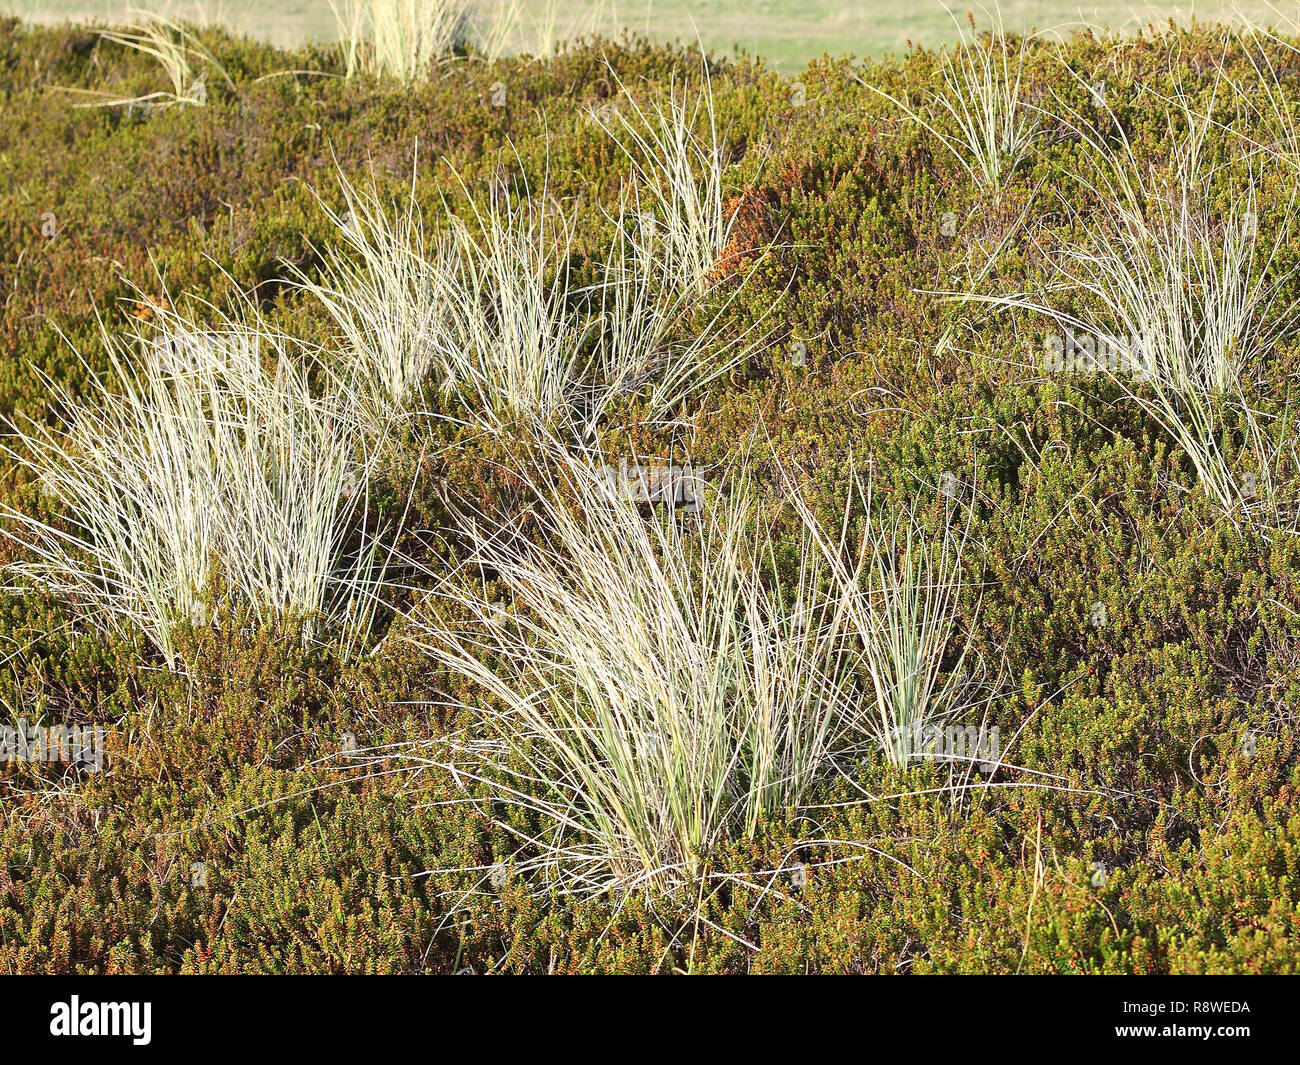 Beach grass and Crowberry in the dunes of the North sea island of Sylt, Germany Stock Photo